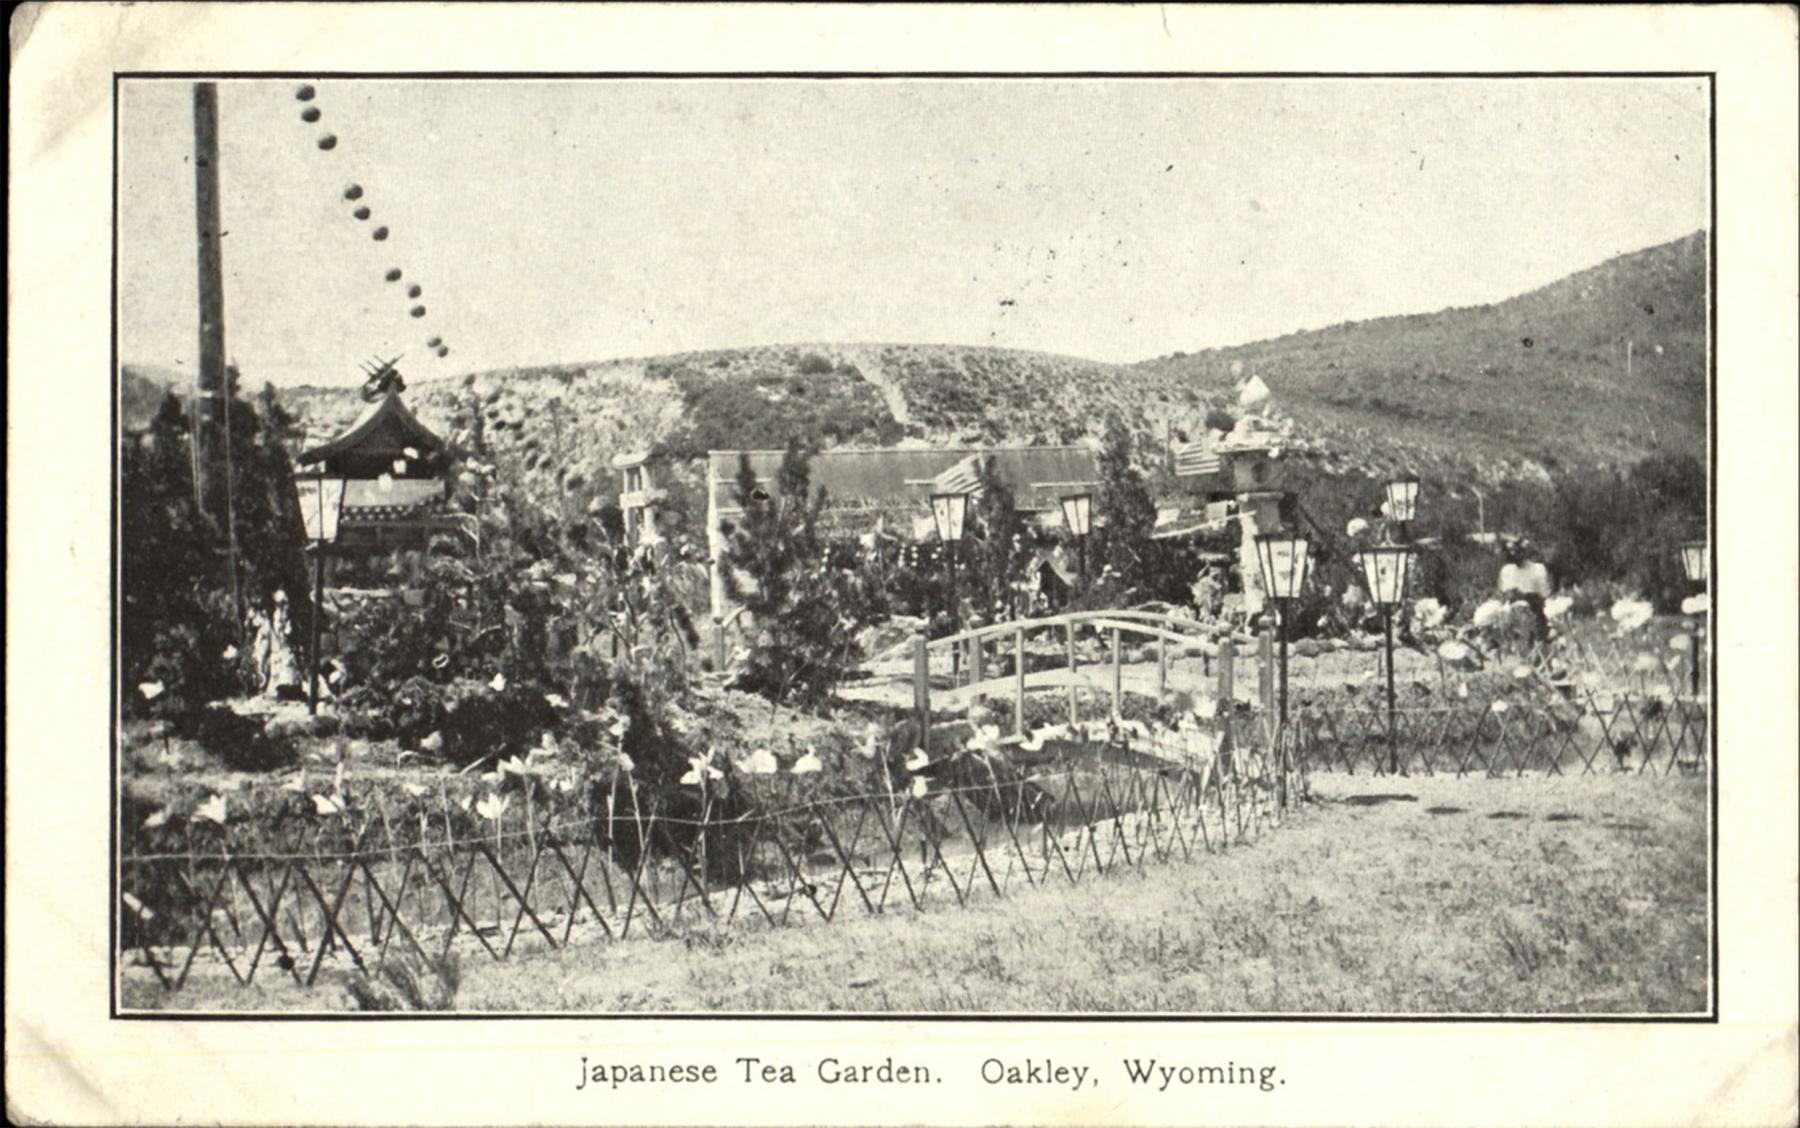 A postcard of a Japanese tea garden with an arched bridge, lanterns and ornamental fences at Oakley, Wyoming, a coal camp on the Oregon Short Line south of Kemmerer, ca. 1909. CardCow.com.